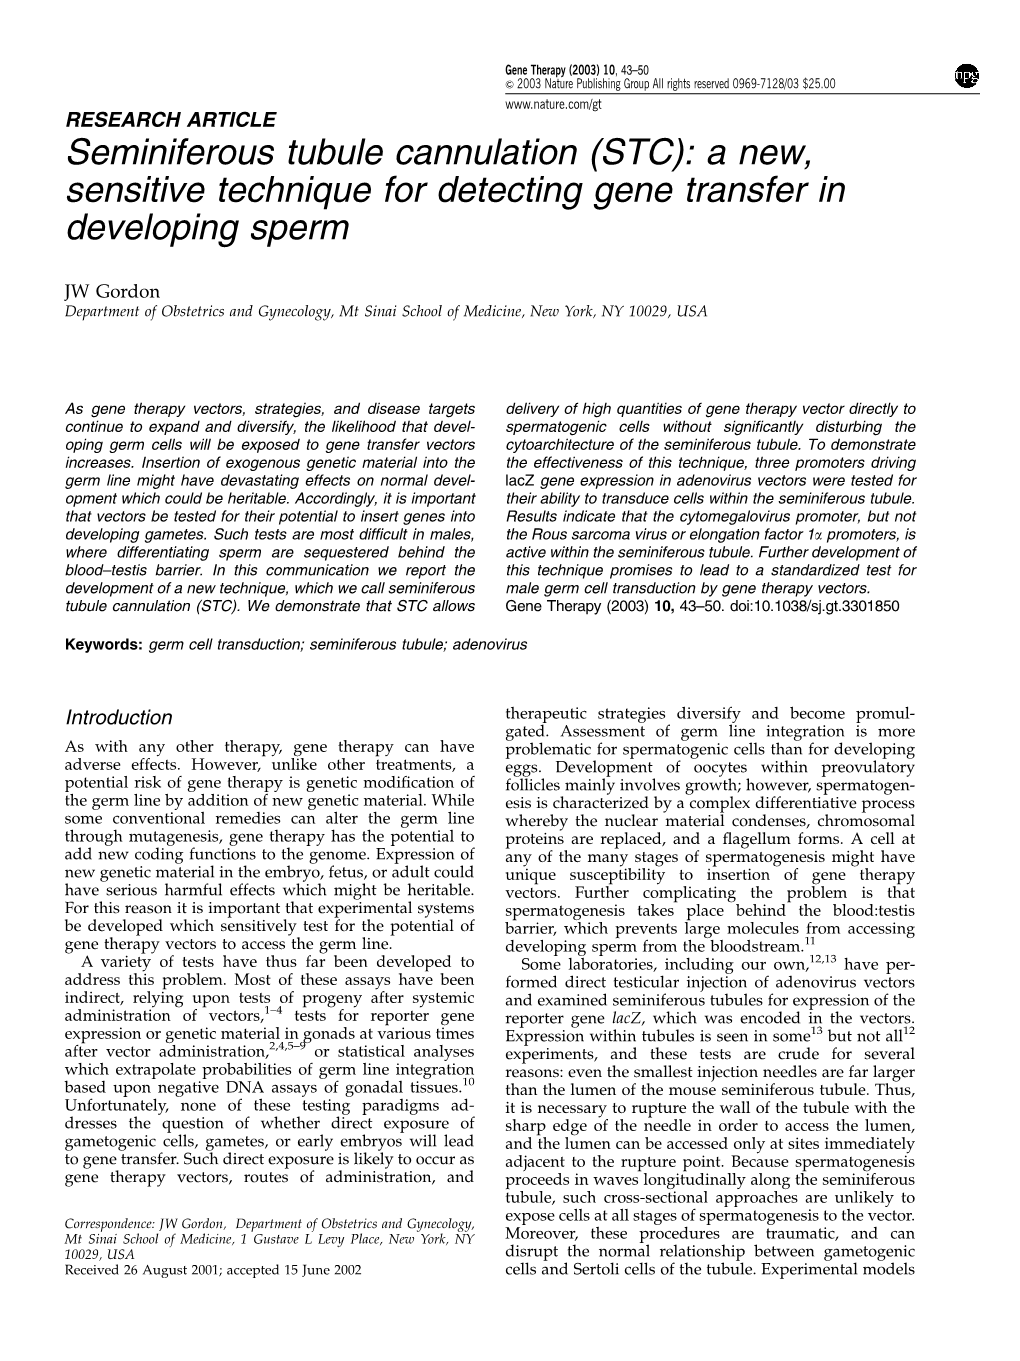 Seminiferous Tubule Cannulation (STC): a New, Sensitive Technique for Detecting Gene Transfer in Developing Sperm